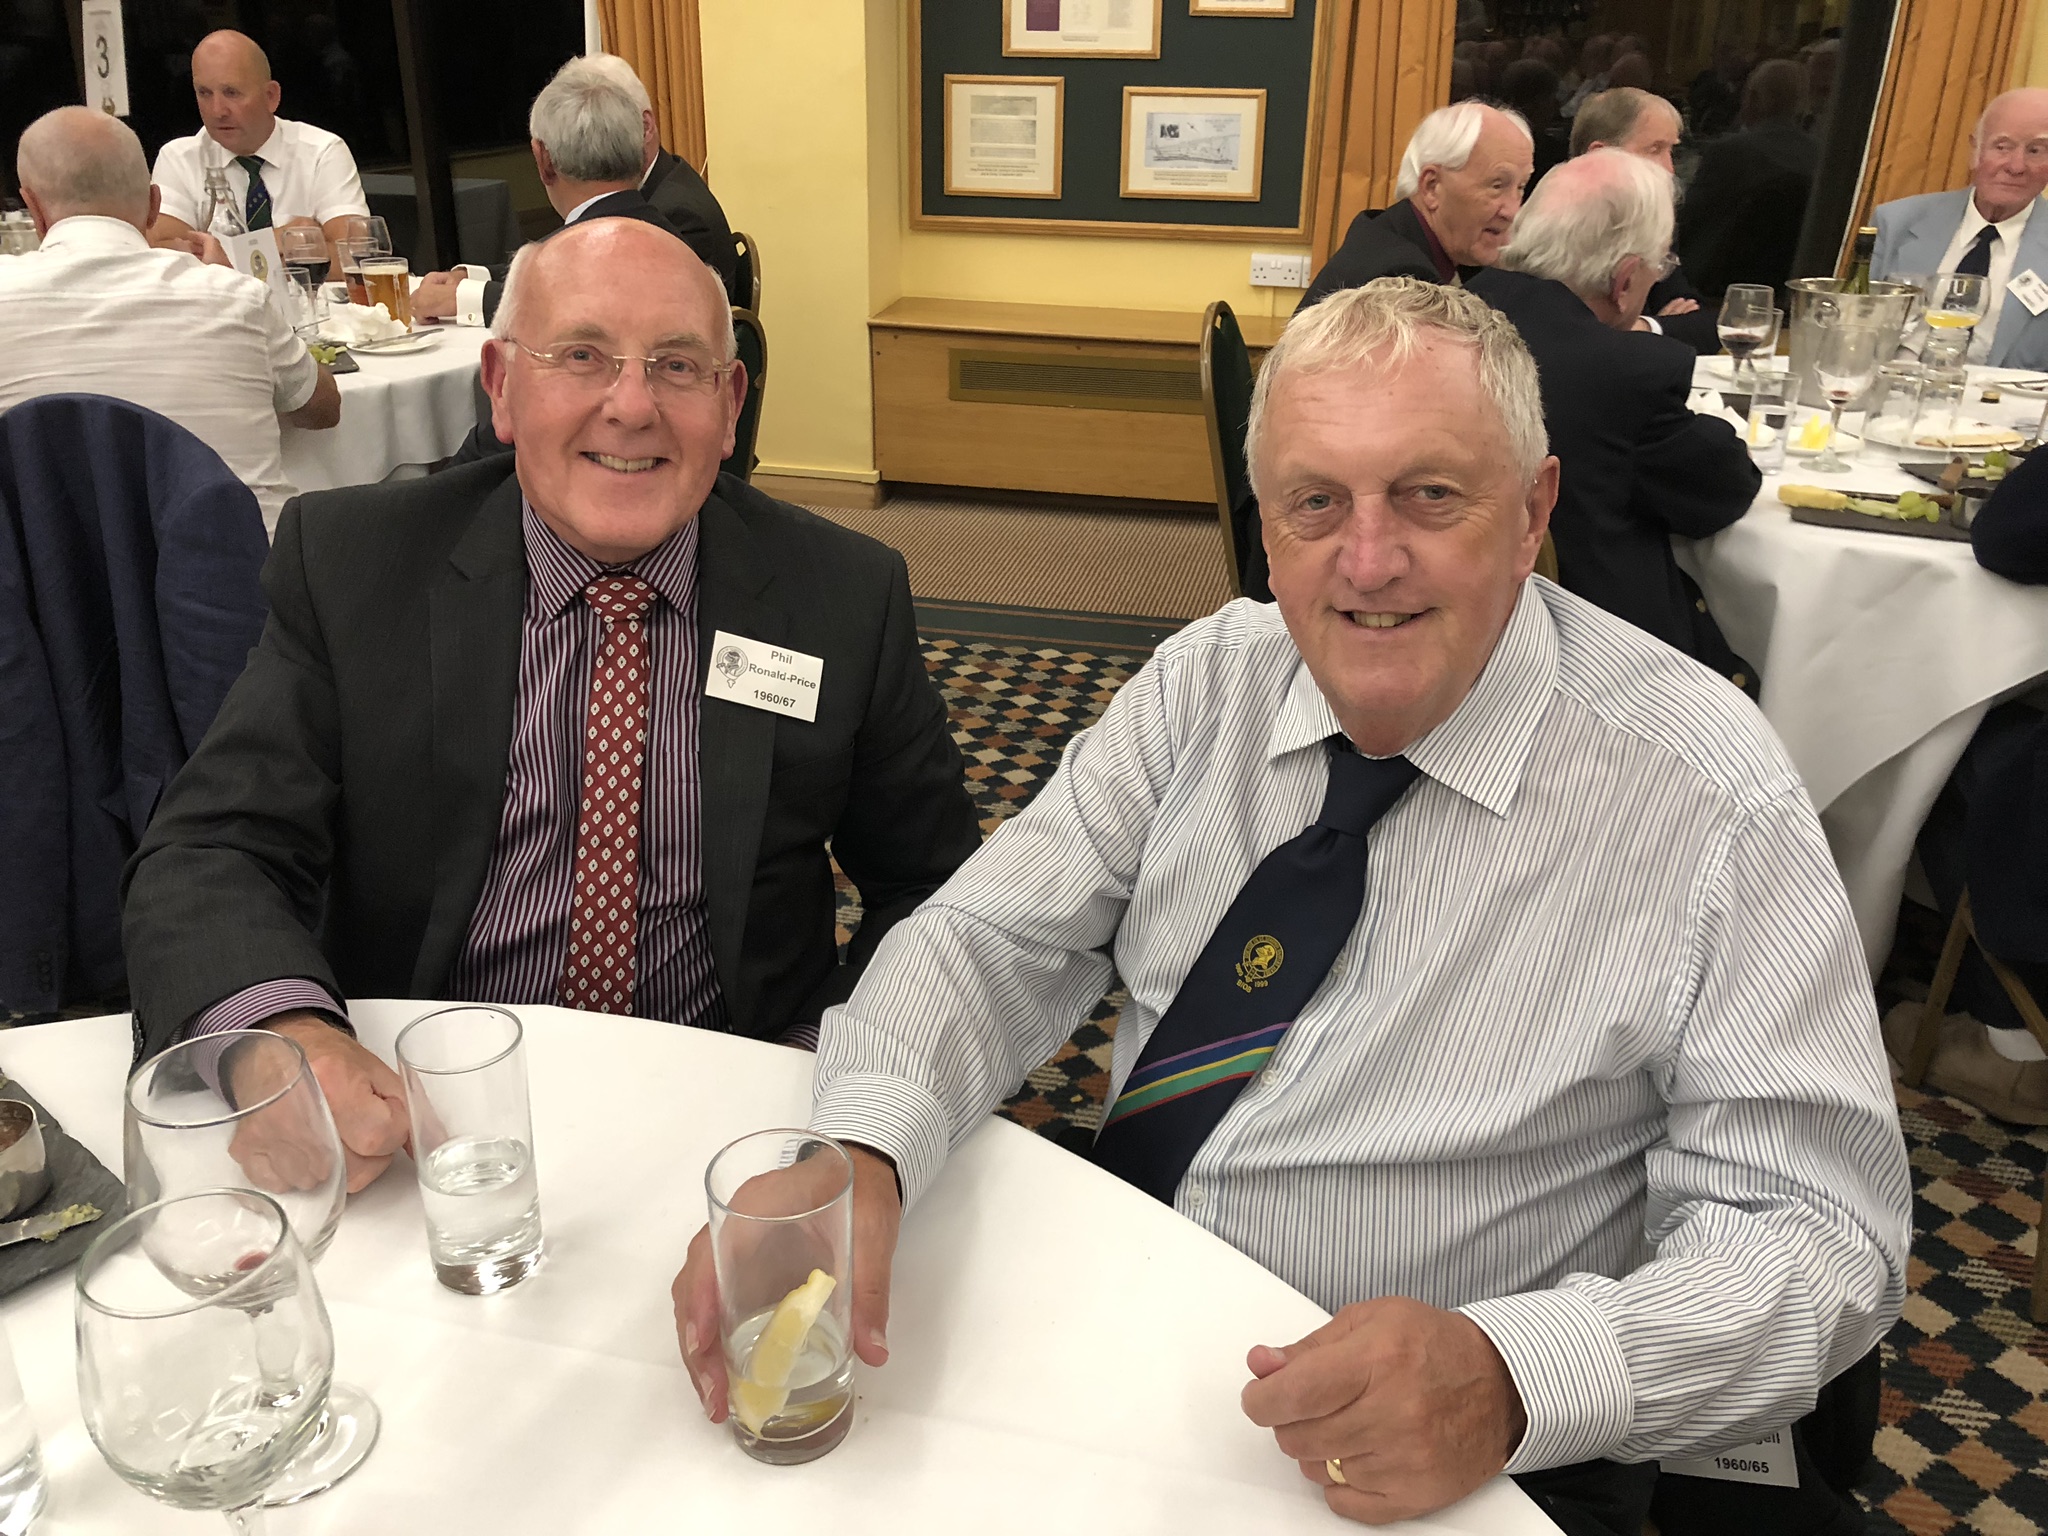 Photograph of Keith Martingell (1960/65) at Reunion Dinner 2019